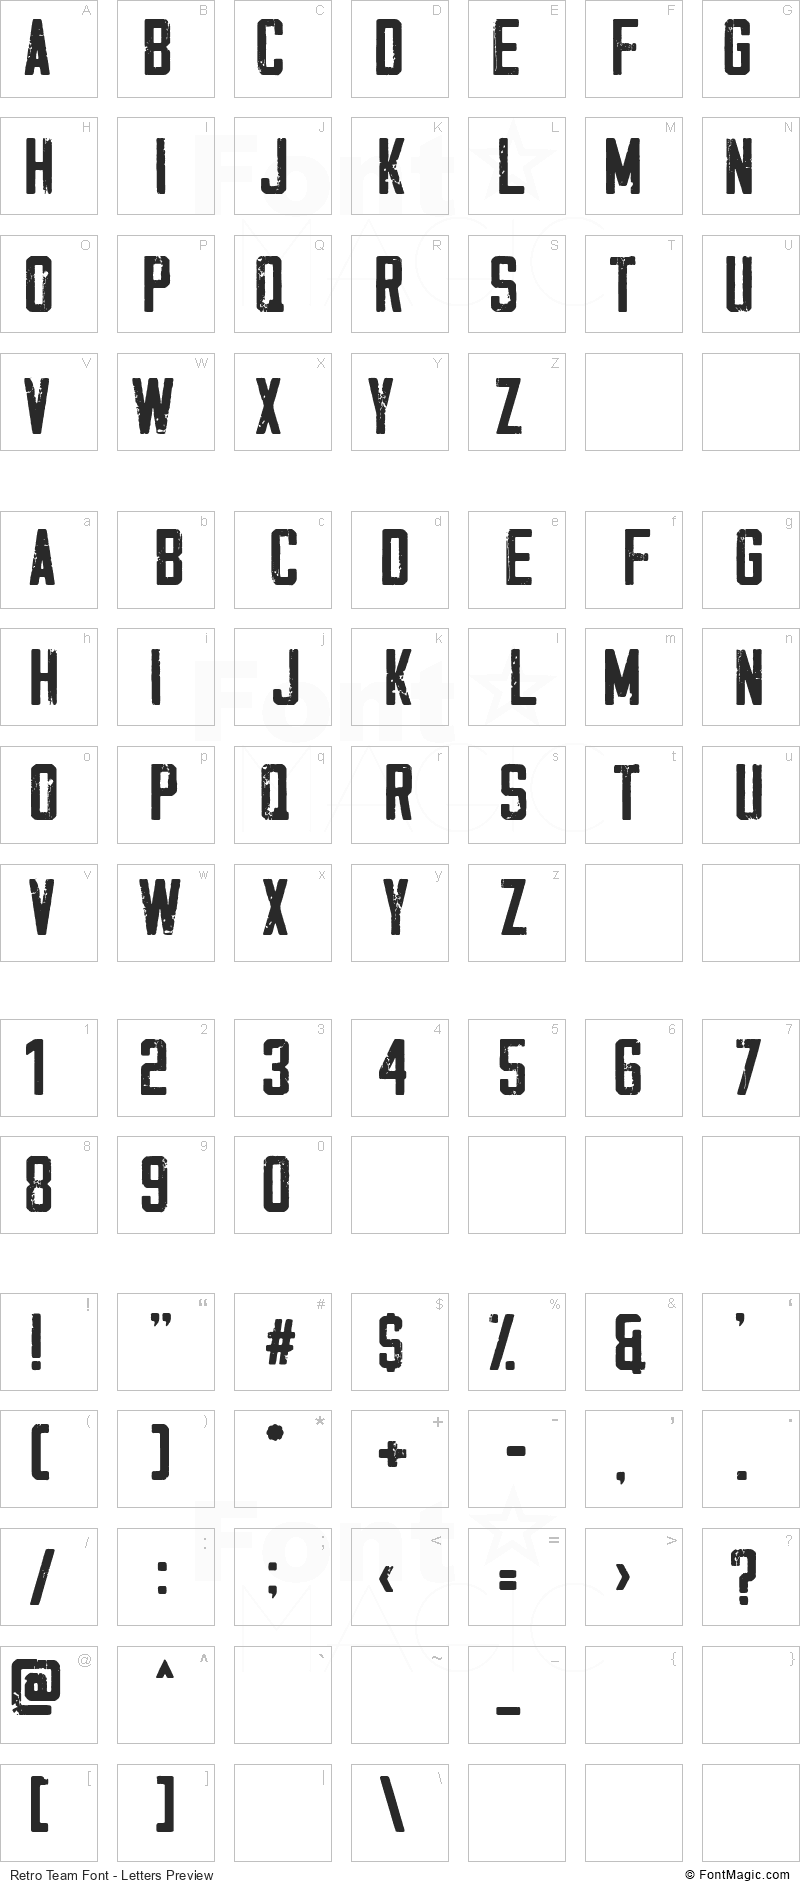 Retro Team Font - All Latters Preview Chart